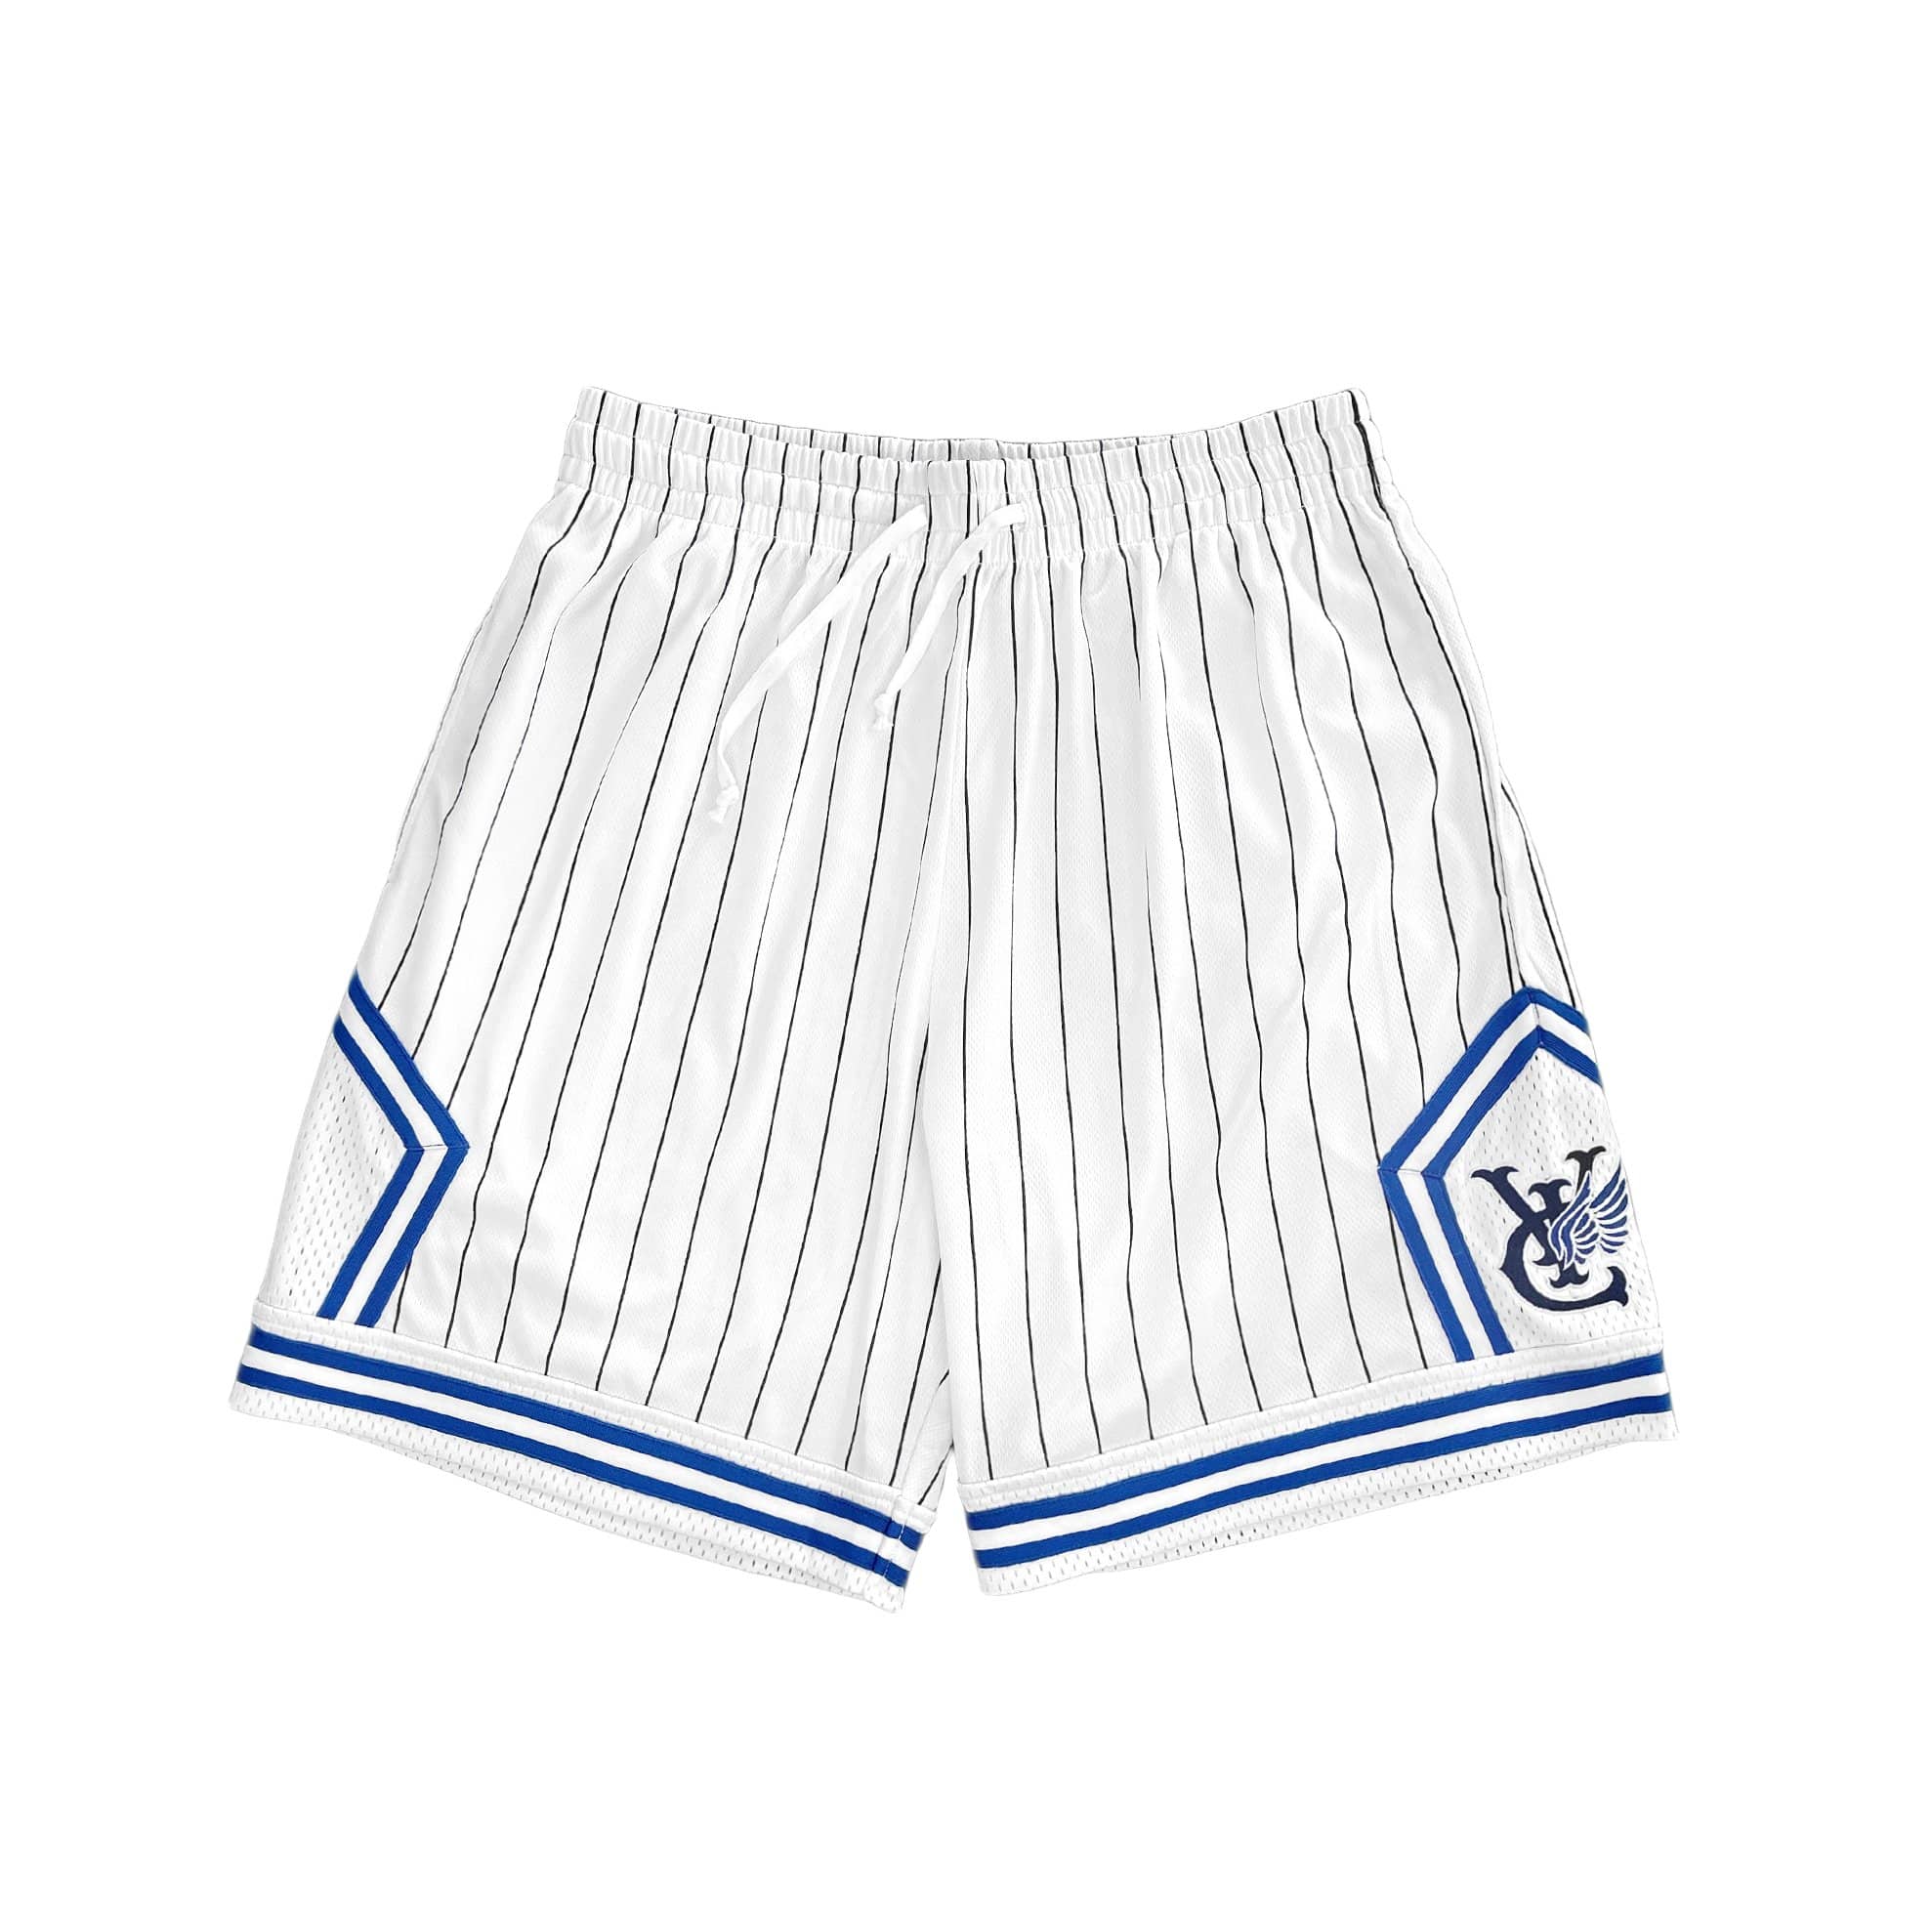 Retro style basketball shorts by New Zealand skate and streetwear clothing label VIC Apparel. American vintage classic sportswear. Full athletic fit.